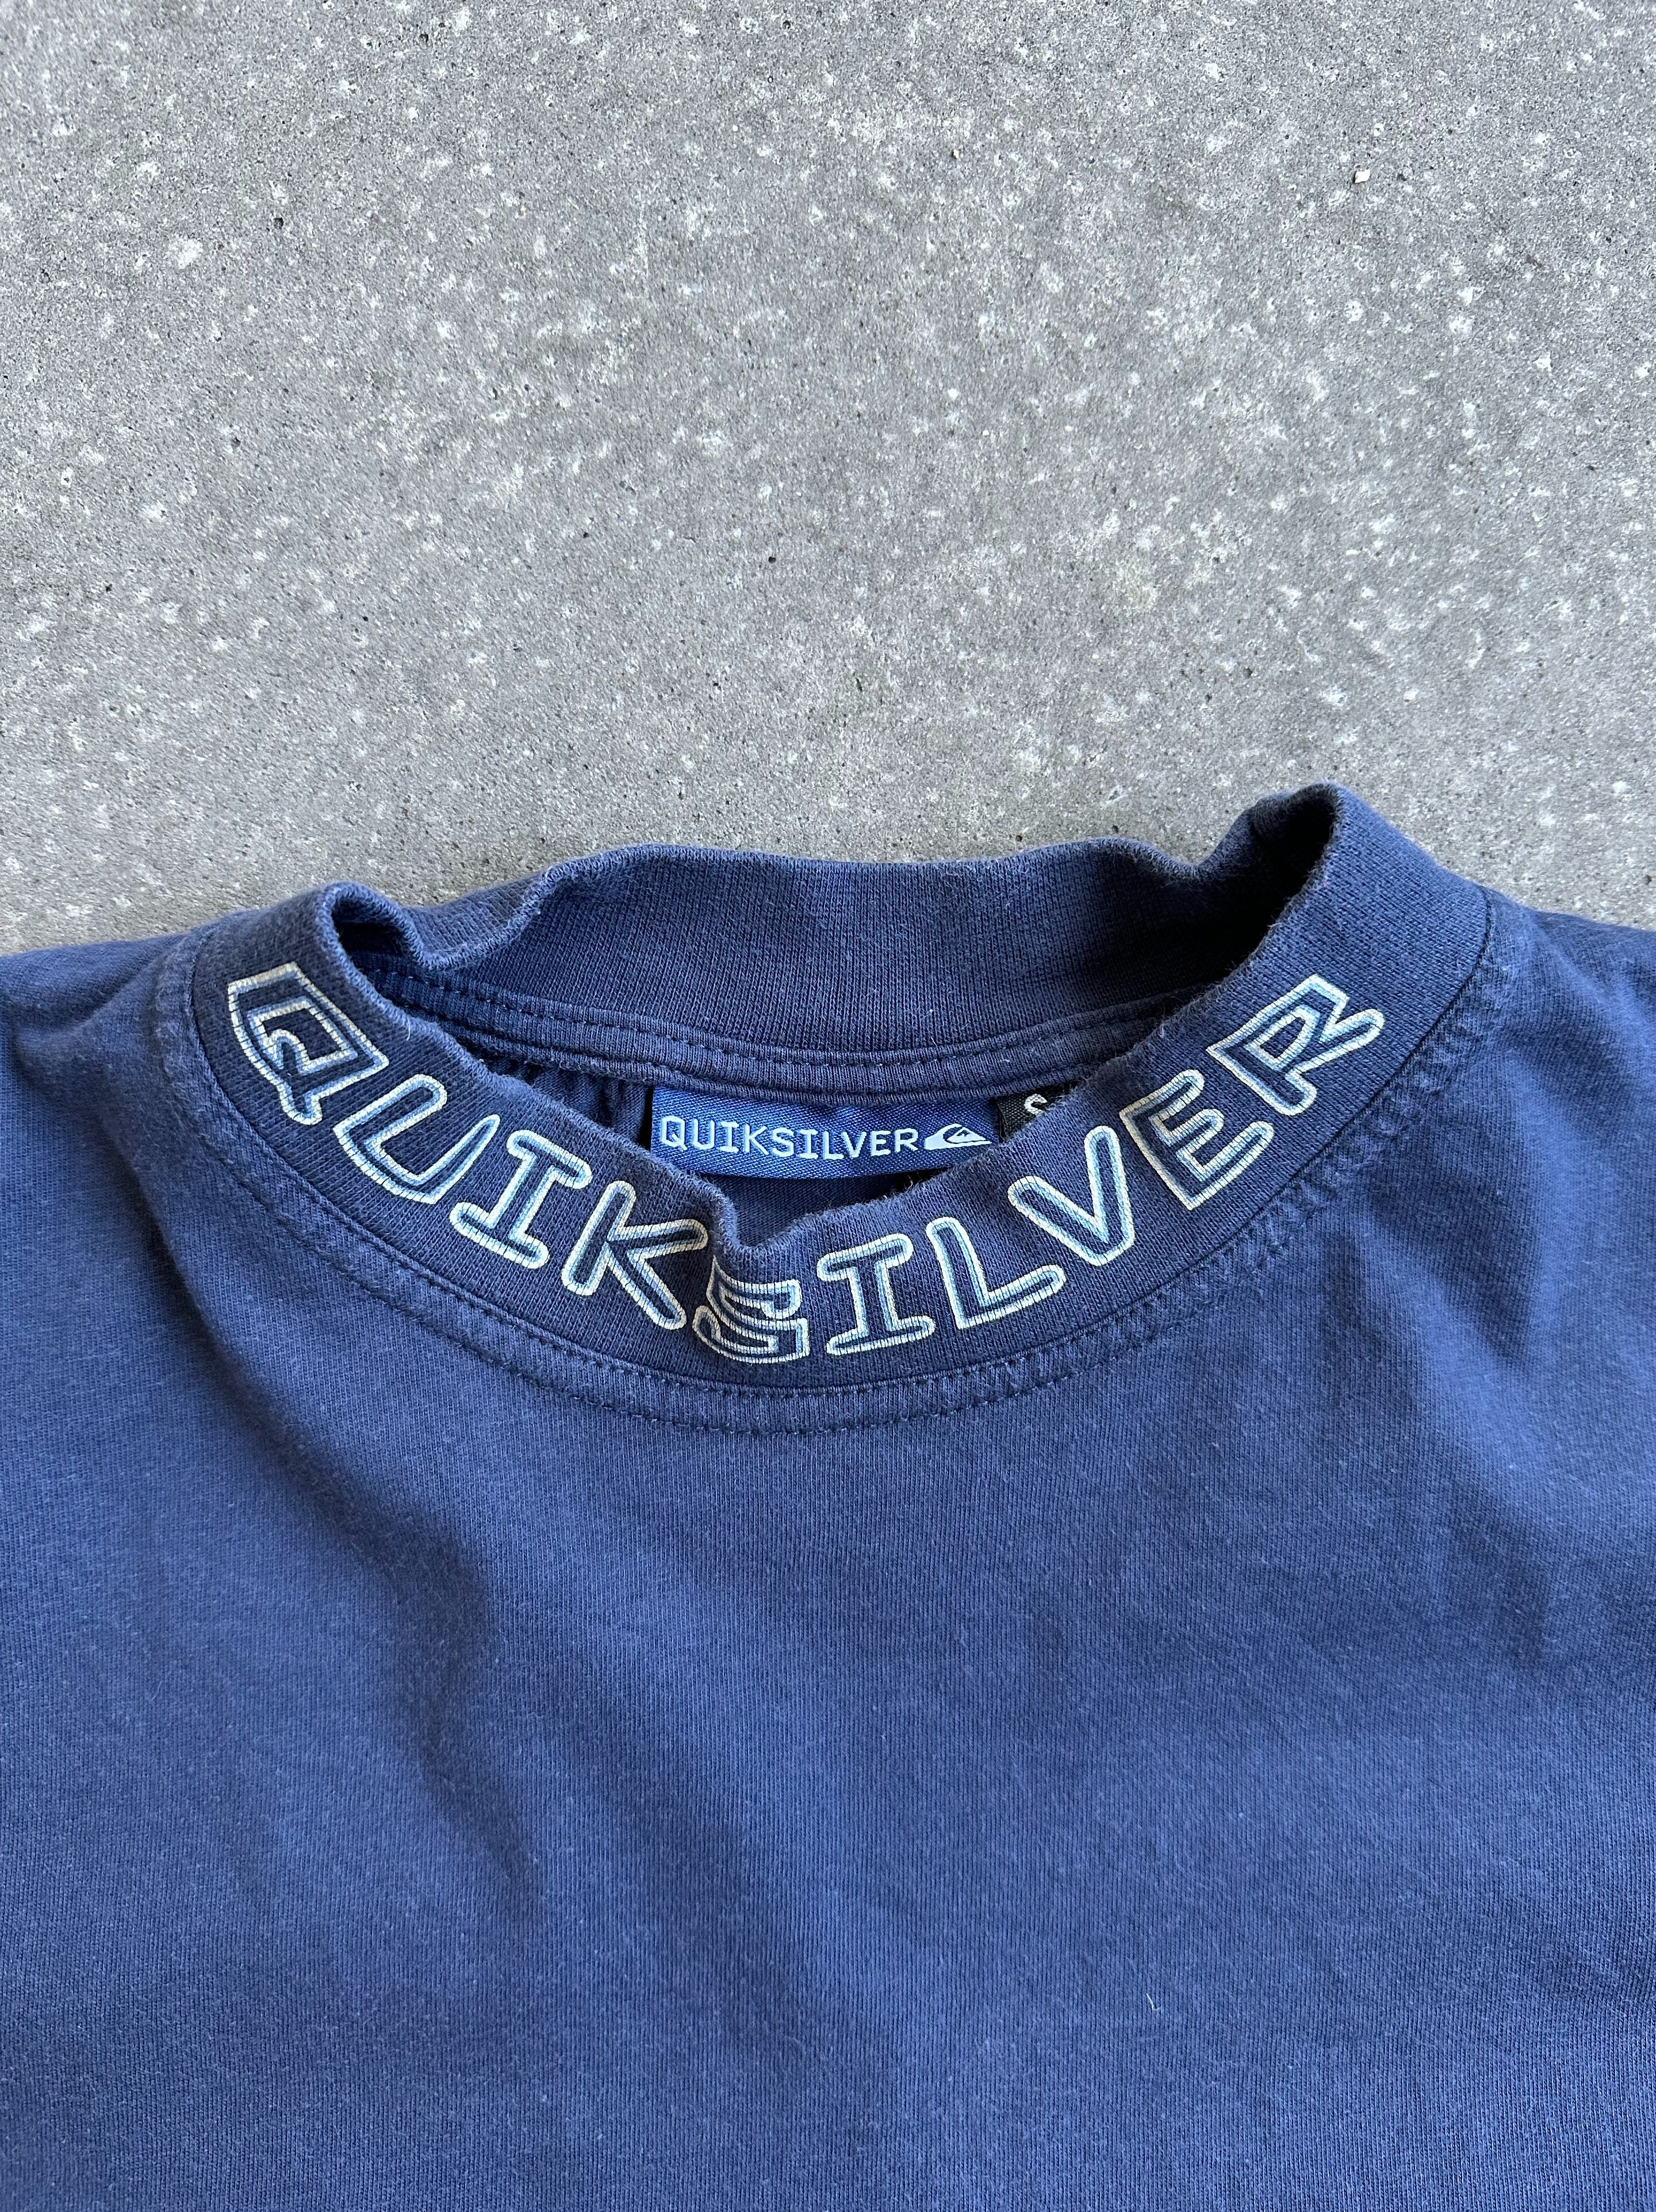 Vintage Quiksilver Tee - Small